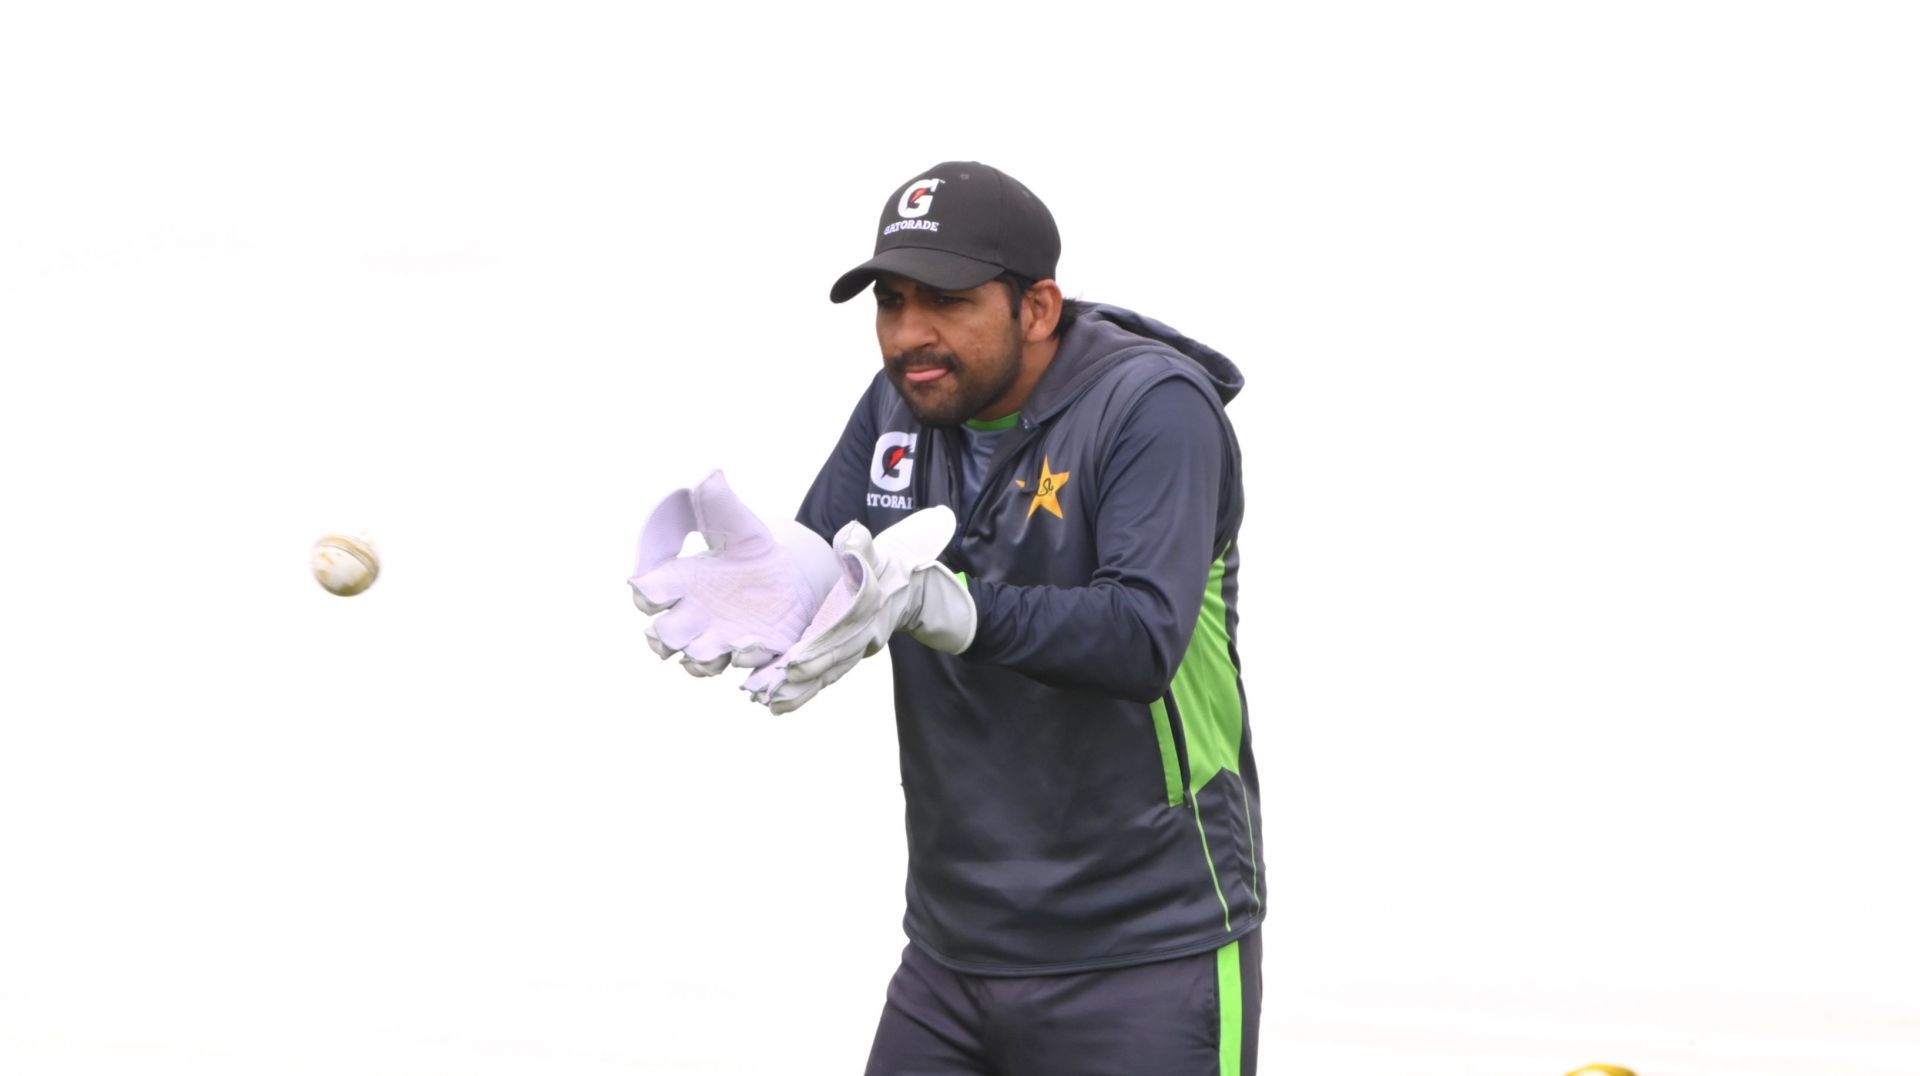 Sarfaraz Ahmed was one of the most experienced players present in the Pakistan squad